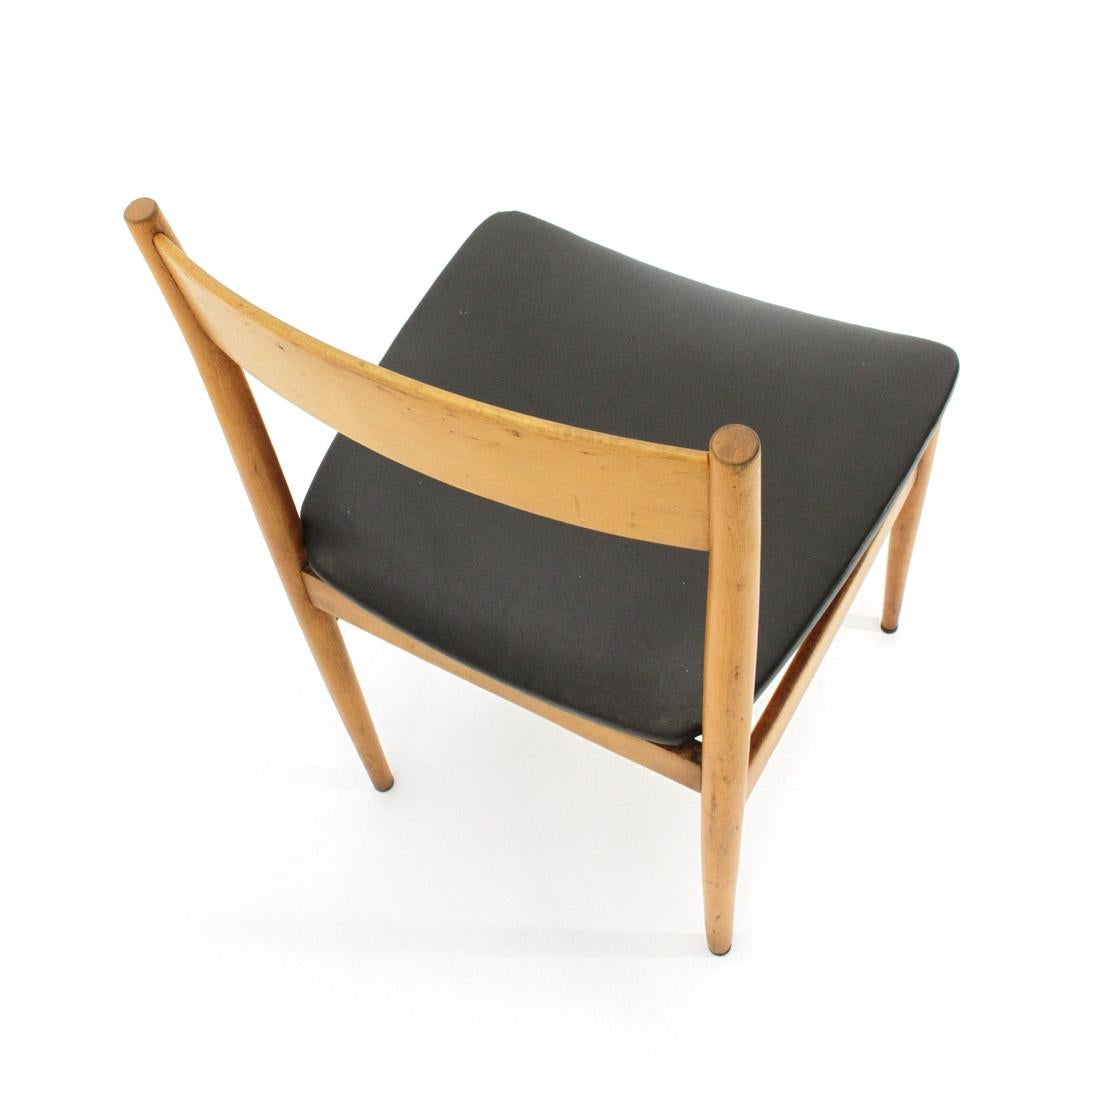 Mid-20th Century Wooden Chair with Upholstered Seat, 1950s For Sale